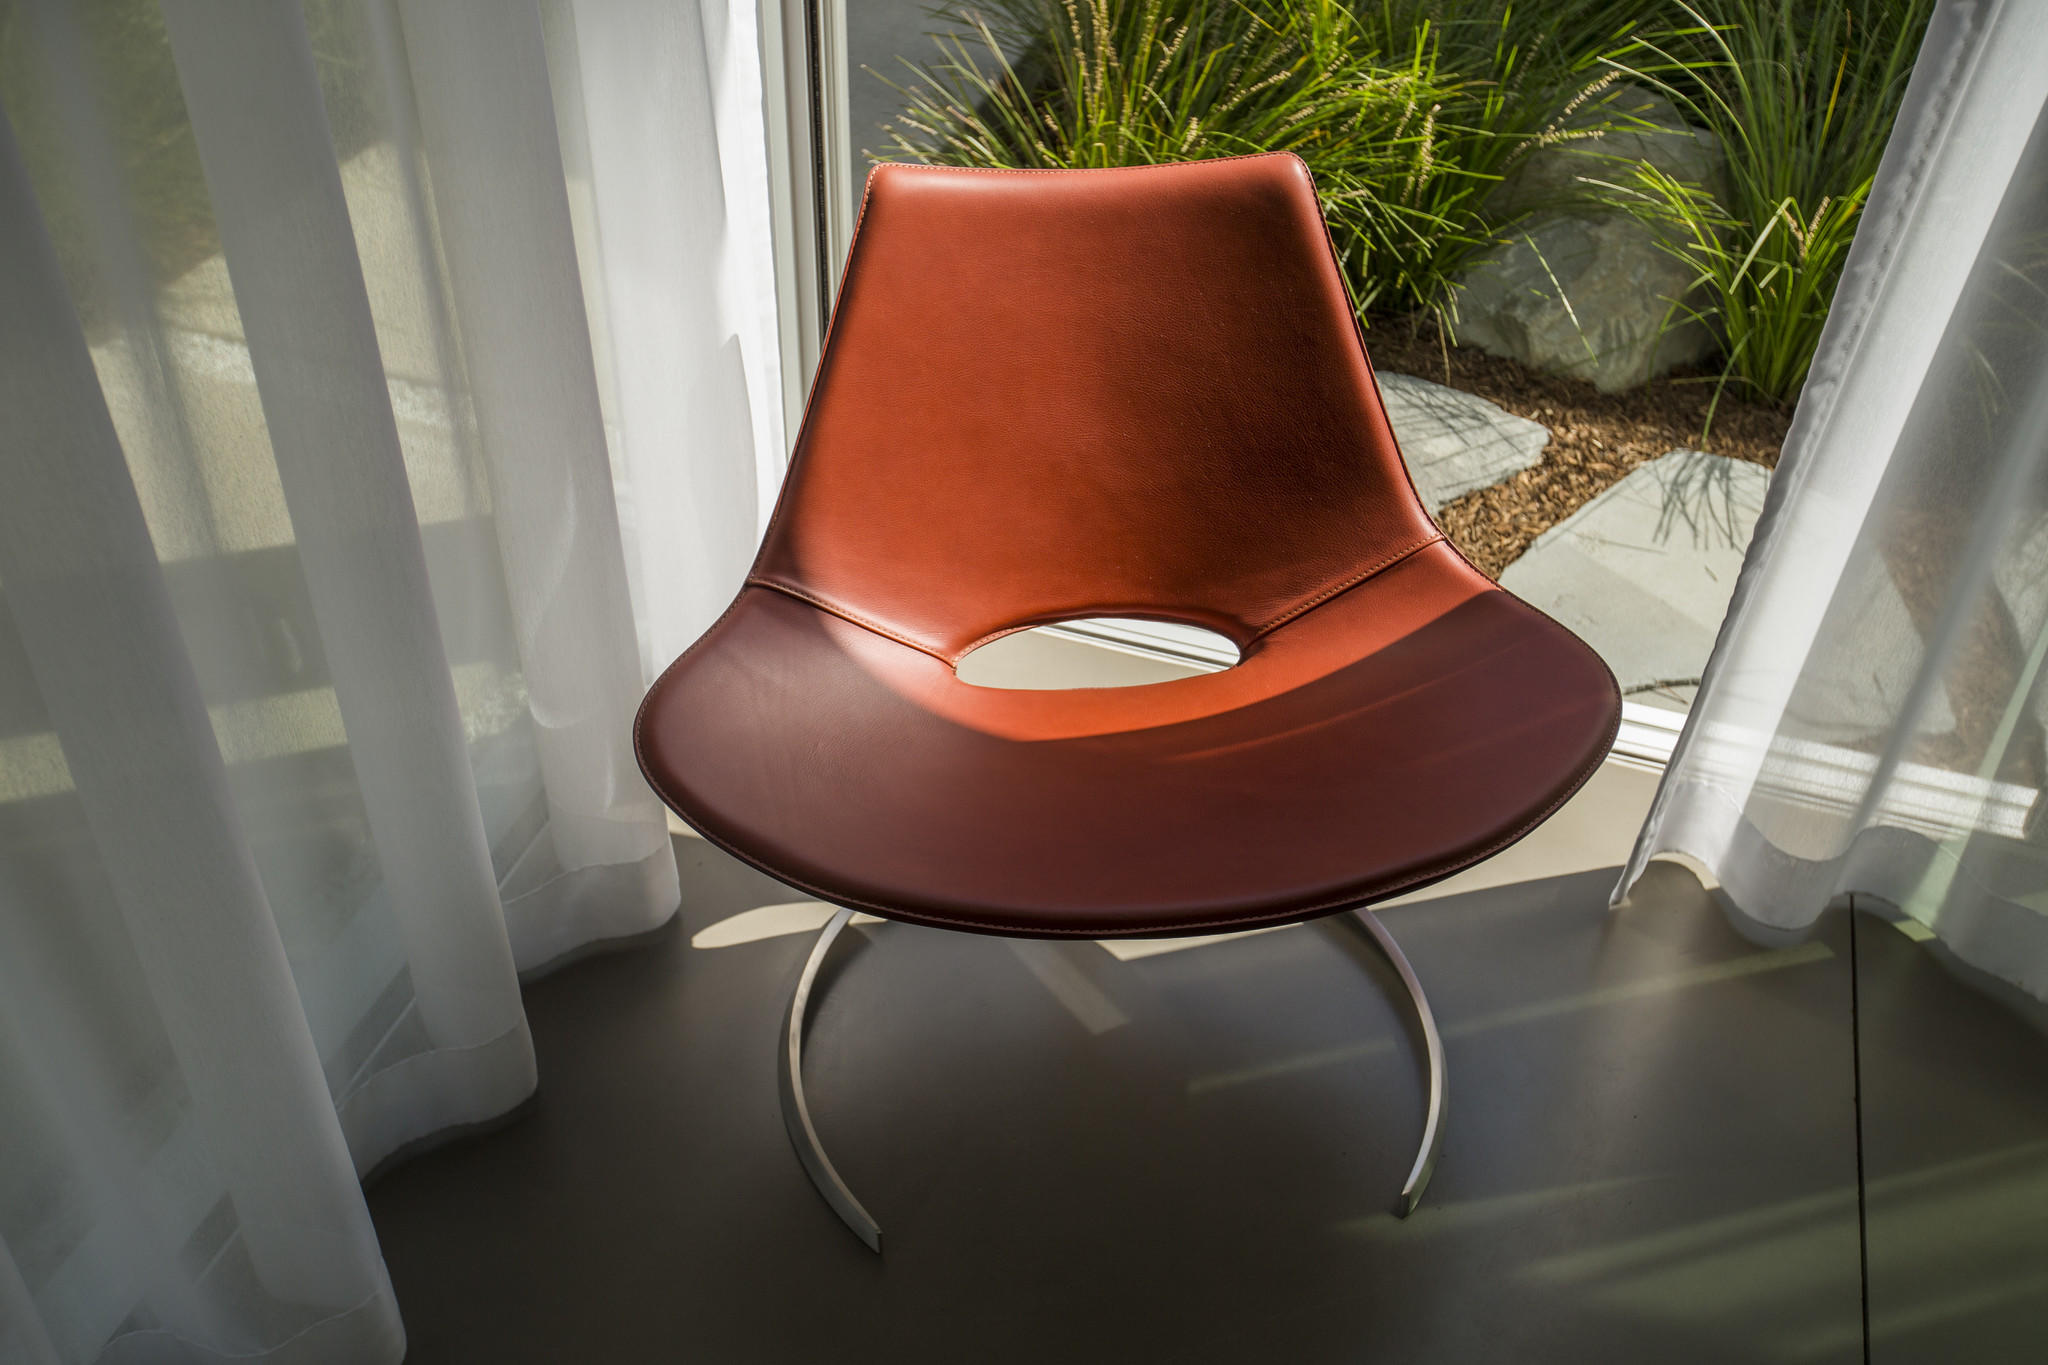 Named after the Turkish word for sword, the Scimitar reading chair was manufactured from original technical drawings from the 1960s, made in Denmark and stitched in Italy.